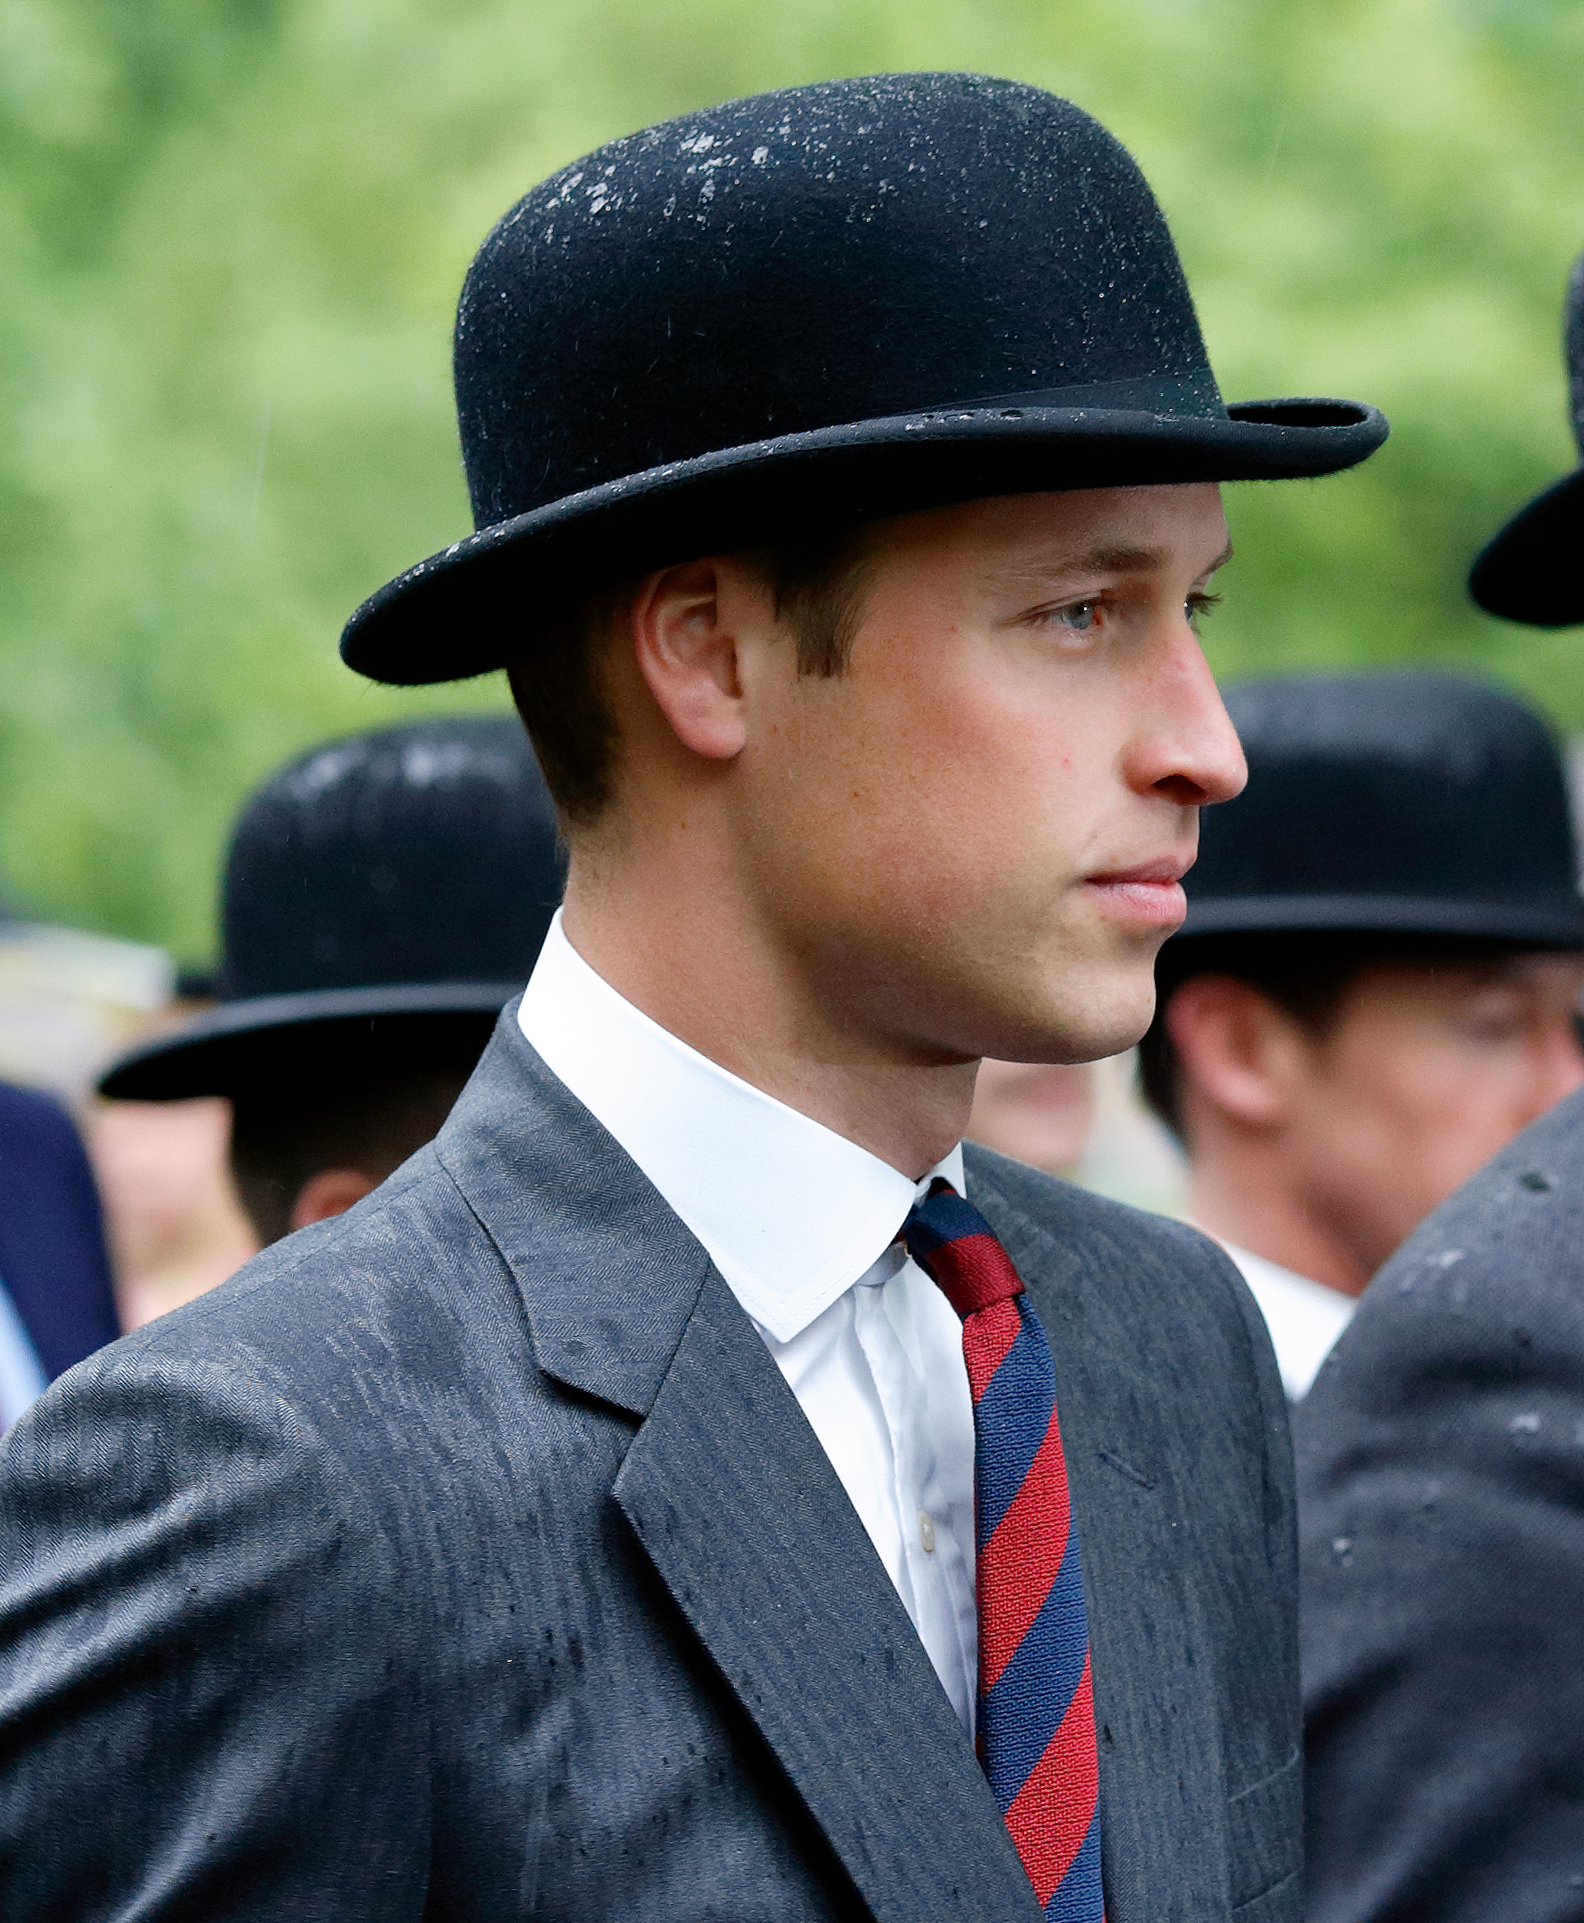 Prince William during the Combined Cavalry Old Comrades Association annual parade on May 13, 2007 in London, England | Source: Getty Images